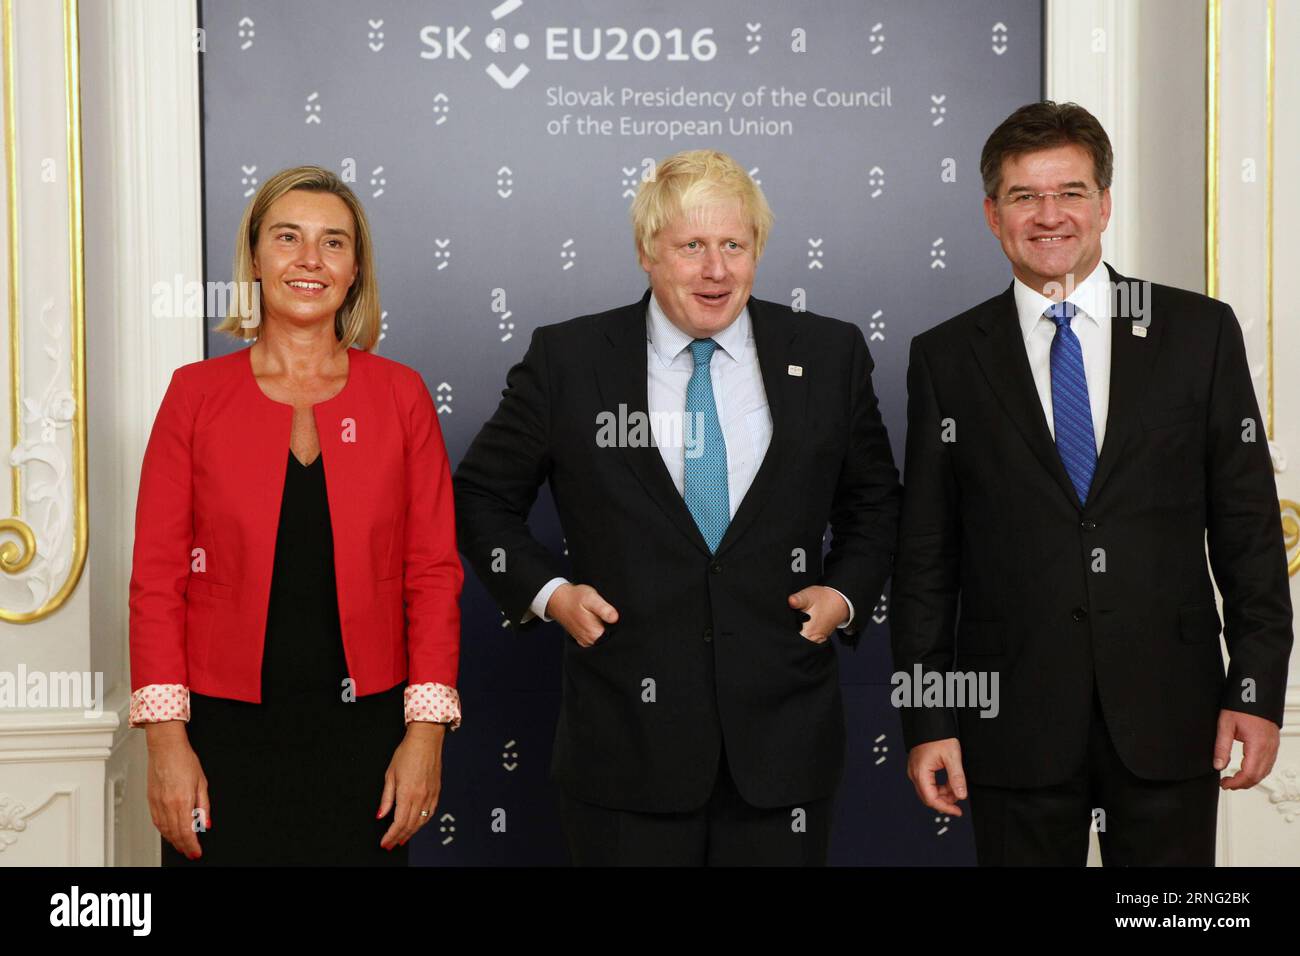 (160902) -- BRATISLAVA, Sept.2, 2016 -- Slovak Minister of foreign and European Affairs Mirislav Lajcak (R) and European Union (EU) High Representative for Foreign Affairs and Security Policy Federica Mogherini (L) welcome British Foreign Secretary Boris Johnson before the informal meeting of foreign affairs ministers, also known as Gymnich, in Bratislava, capital of Slovakia, Sept. 2, 2016. The current issues of global foreign and security policy will be high on the agenda of Gymnich, which kicked off on Friday. ) SLOVAKIA-BRATISLAVA-EU FM MEETING AndrejxKlizan PUBLICATIONxNOTxINxCHN   160902 Stock Photo